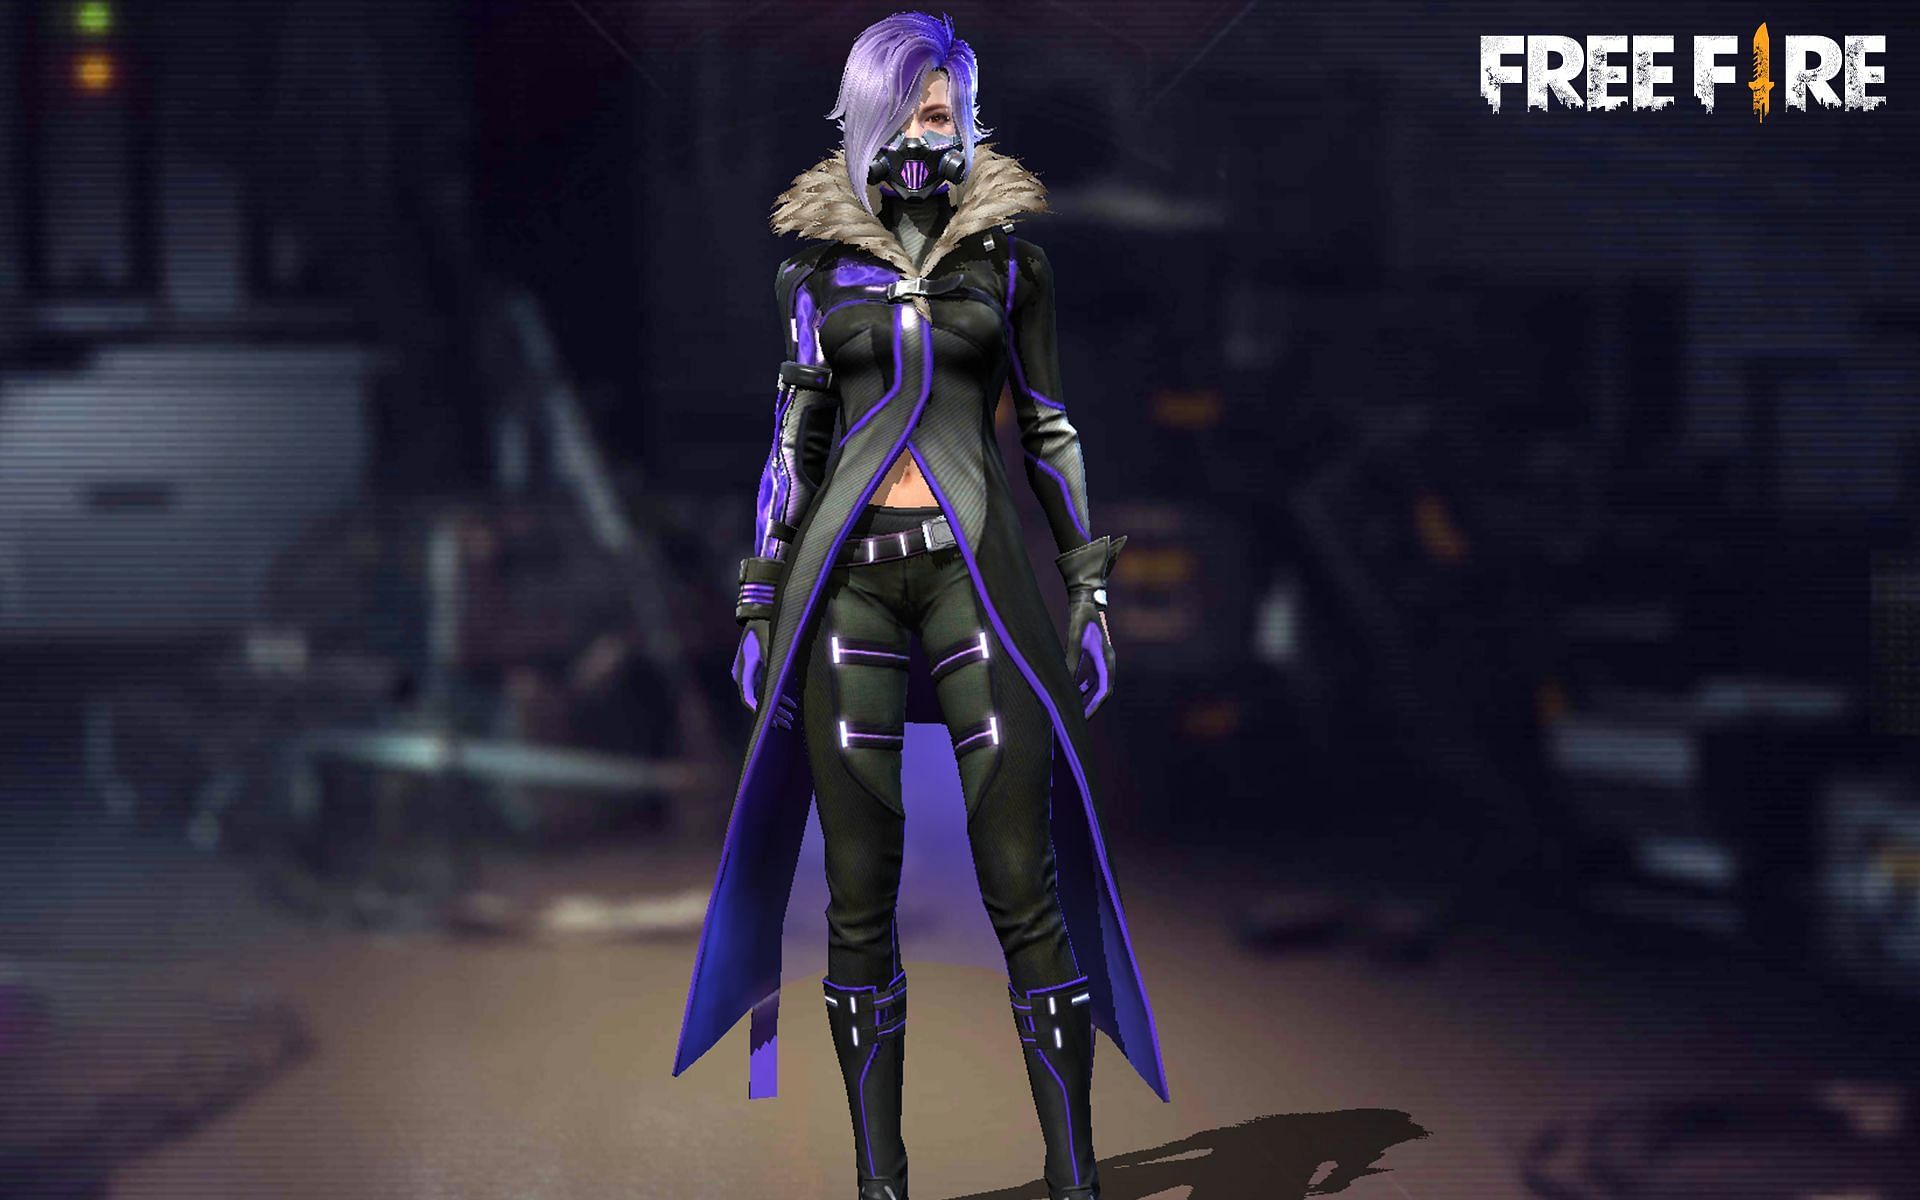 This costume bundle is the main attraction of the new event (Image via Free Fire)